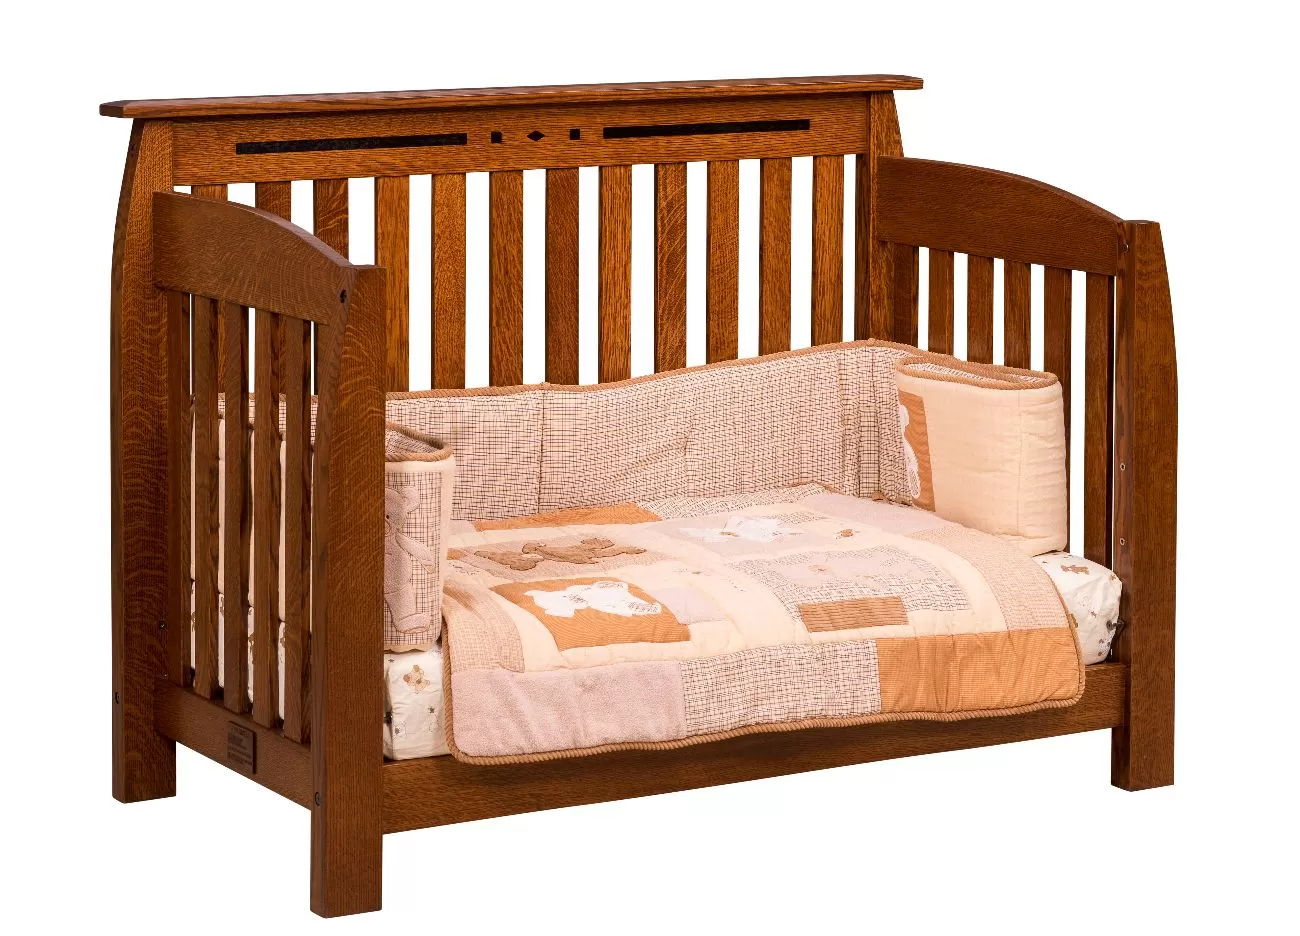 Linbergh 801a toddler bed